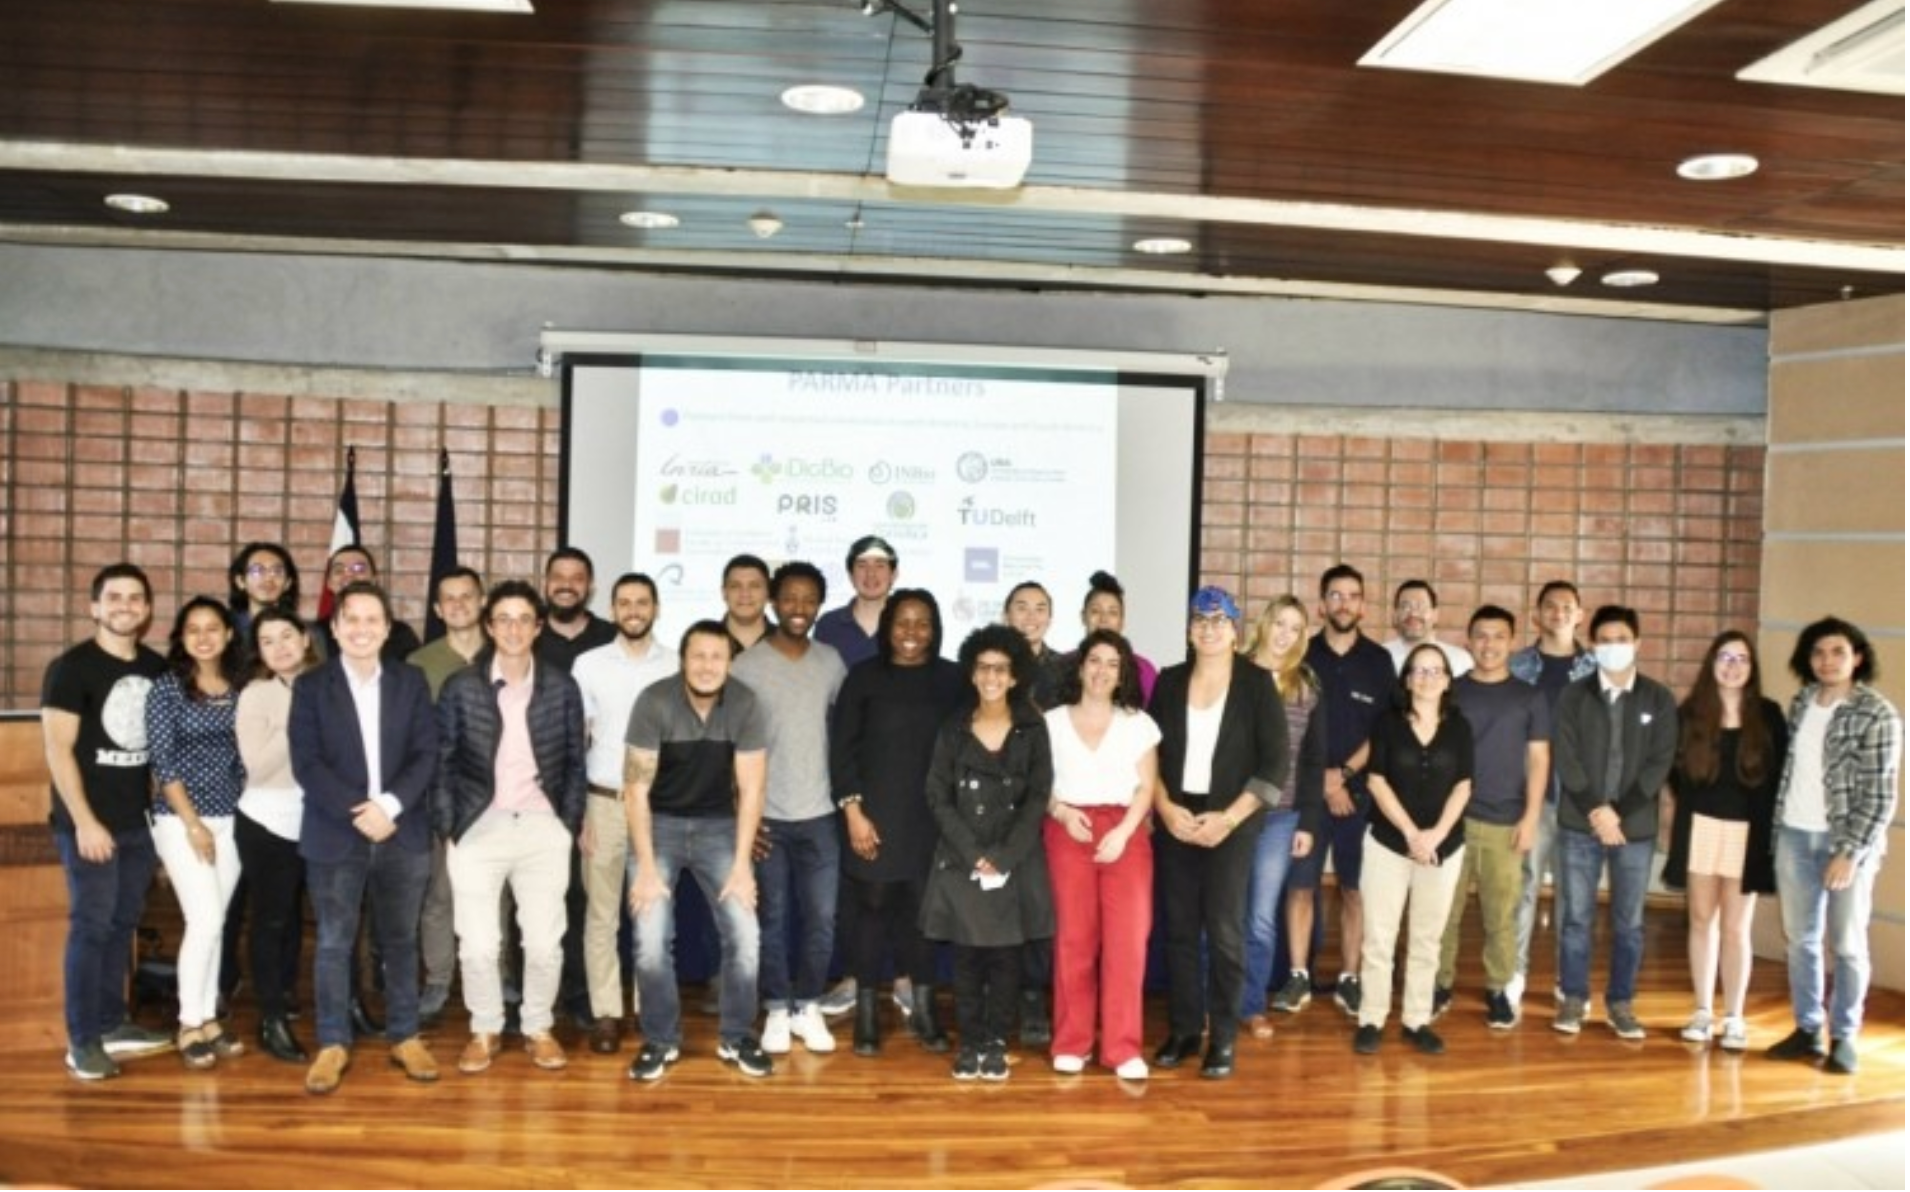 A photo of the DAIR team and the researchers and students we met from Tecnológico de Costa Rica on a stage.